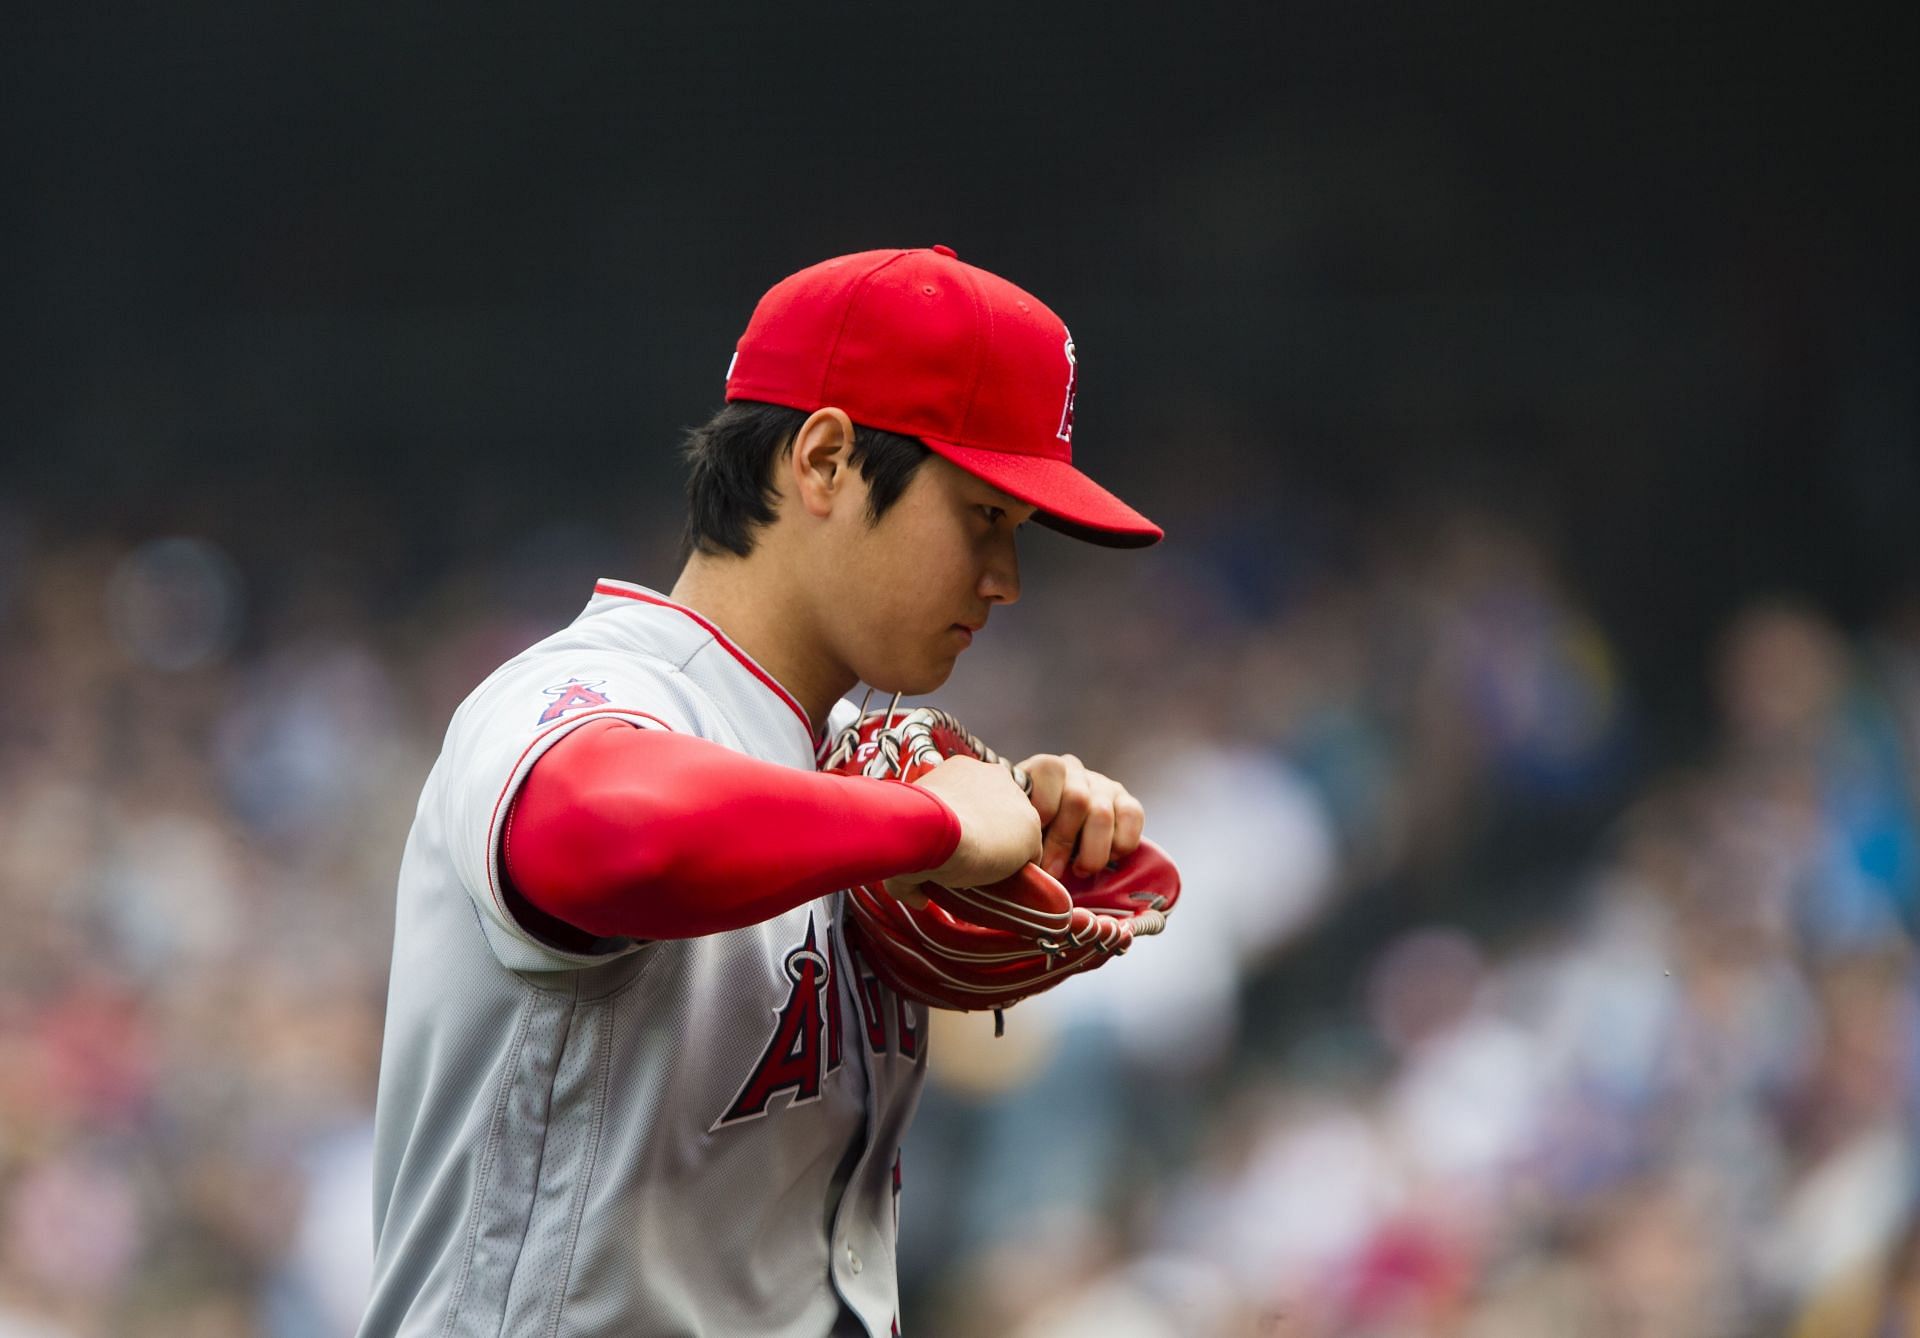 Did New Balance unveil special glove for Shohei Ohtani? All about